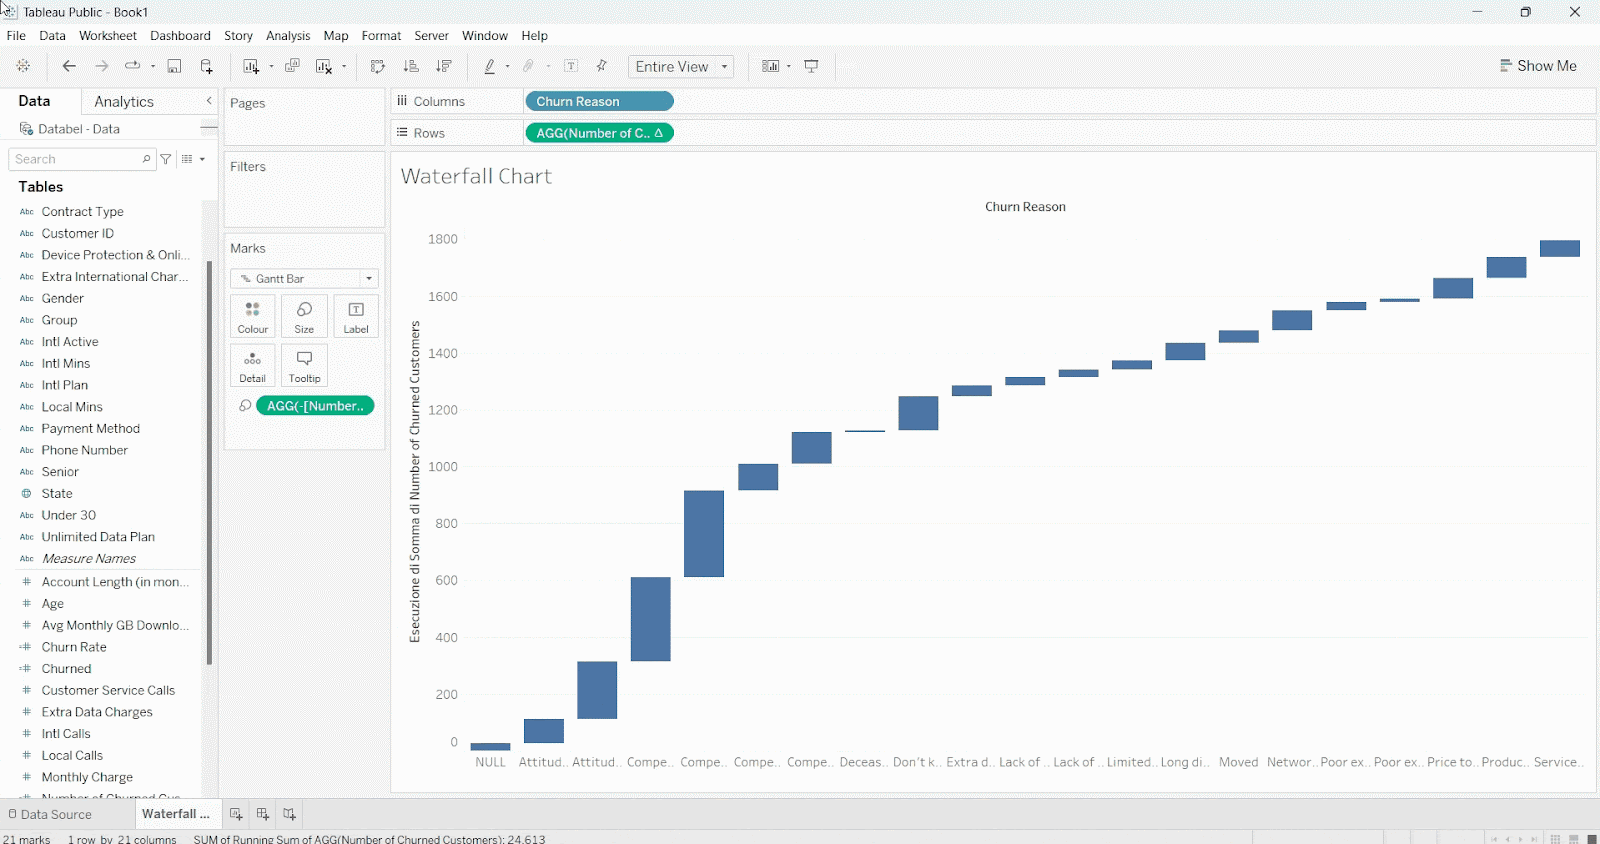 how to fix the orientation of the x-axis labels in Tableau